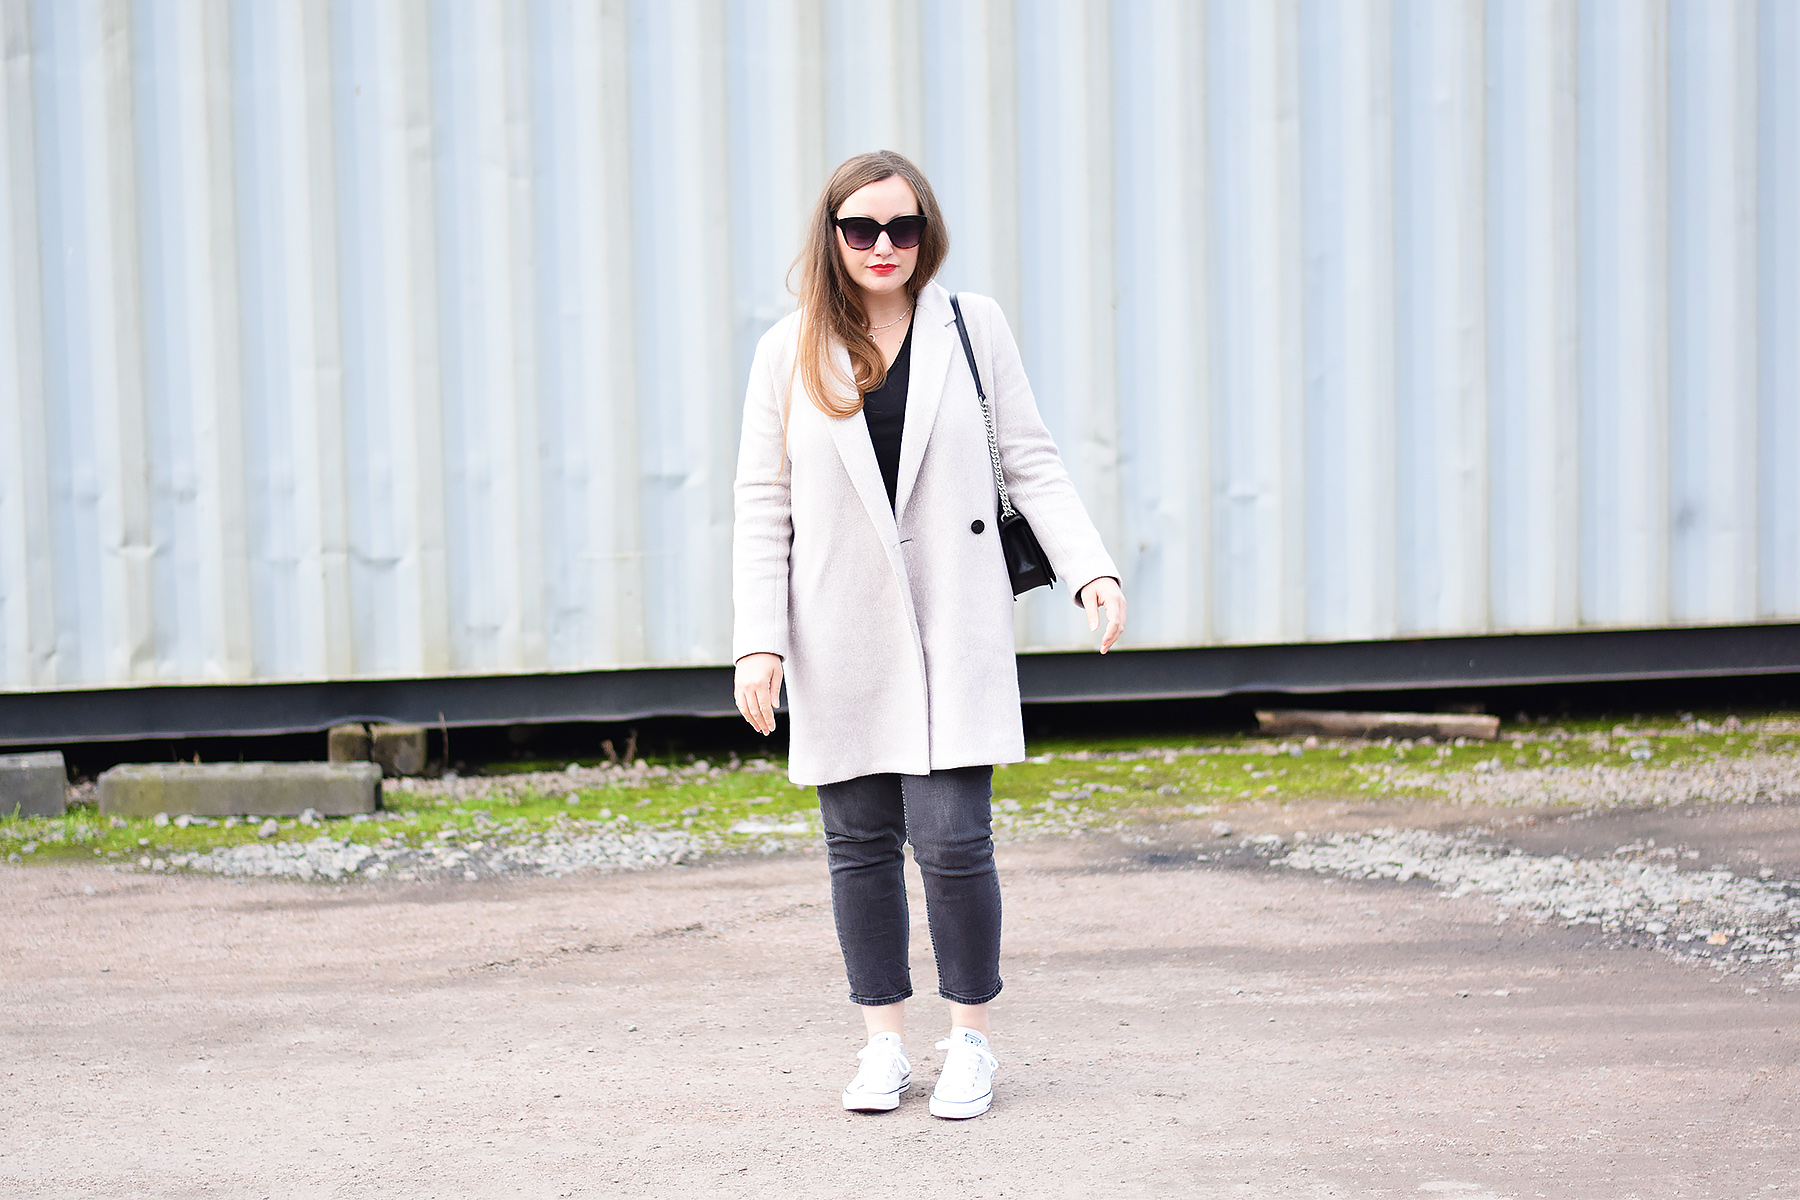 Grey coat with converse - everyday outfit ideas 